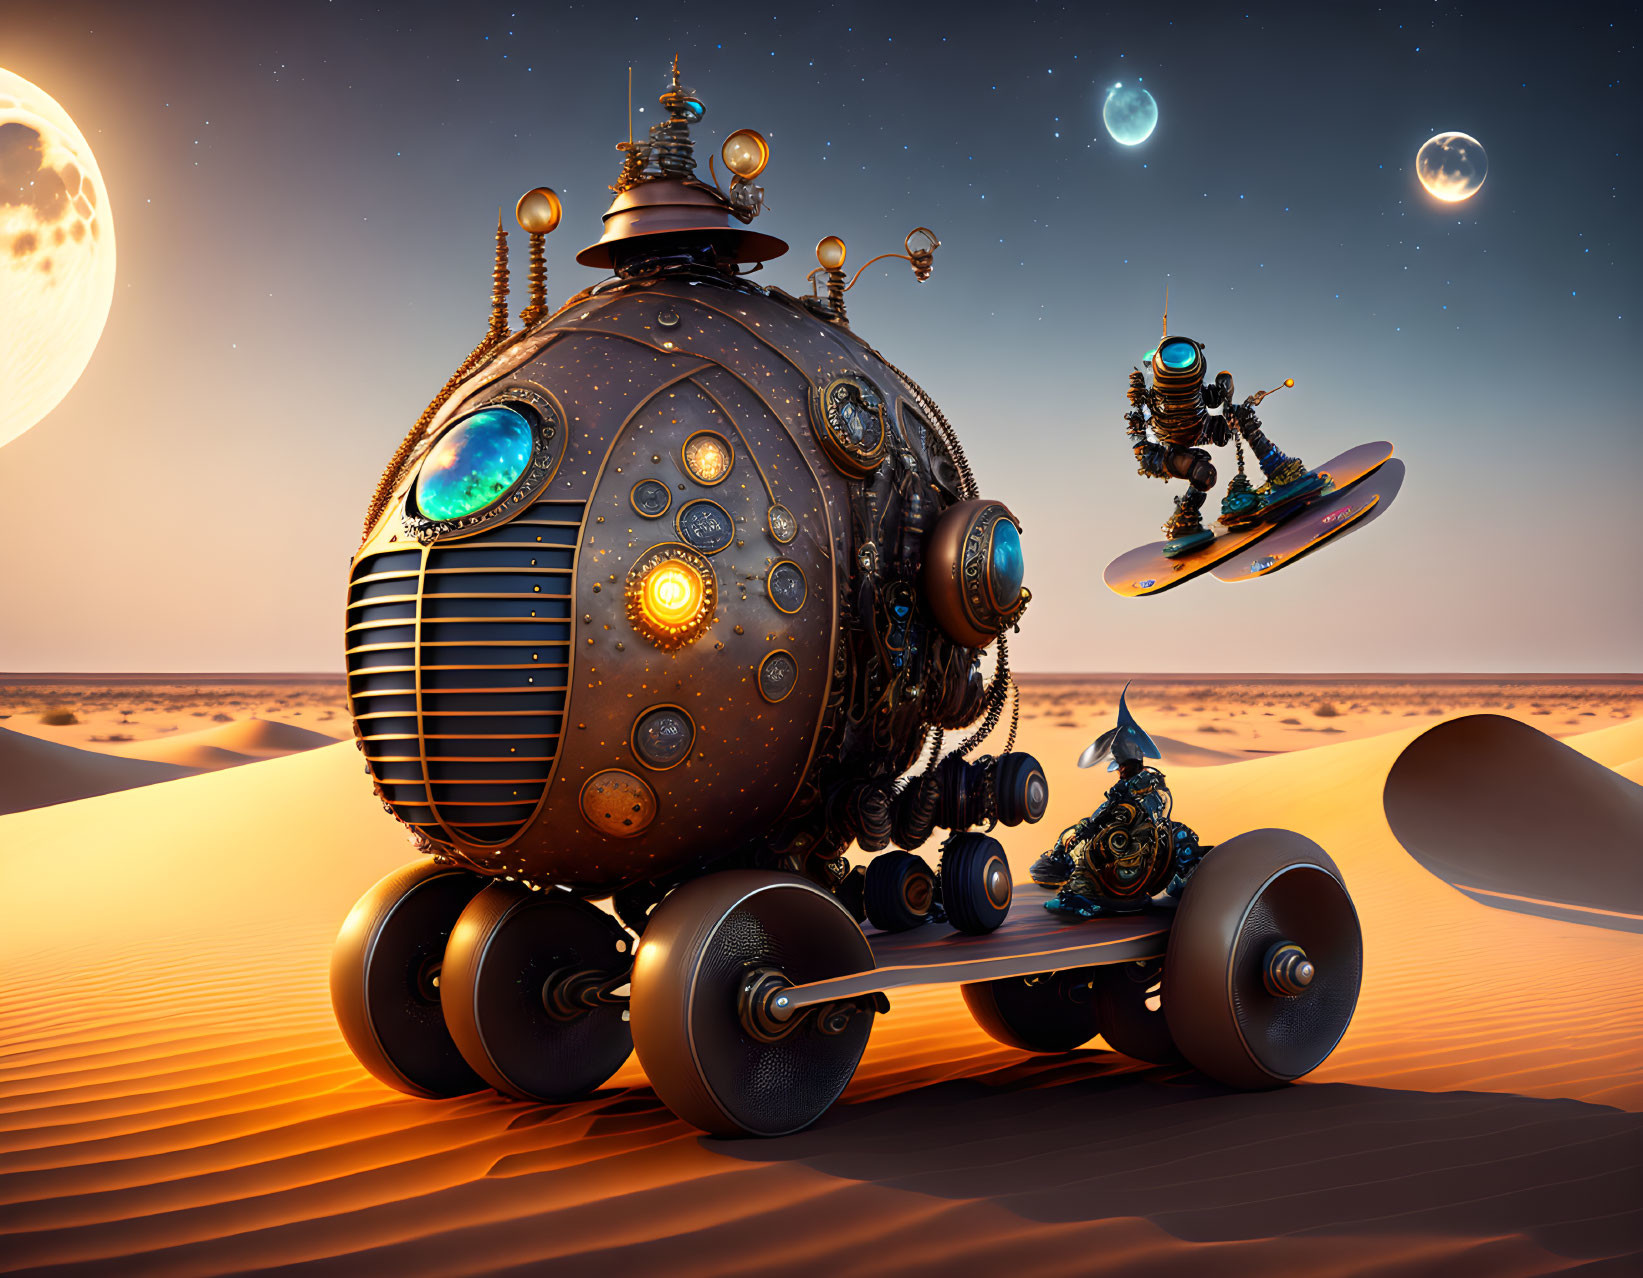 Futuristic steampunk vehicle and hoverboarding robot in desert with multiple moons